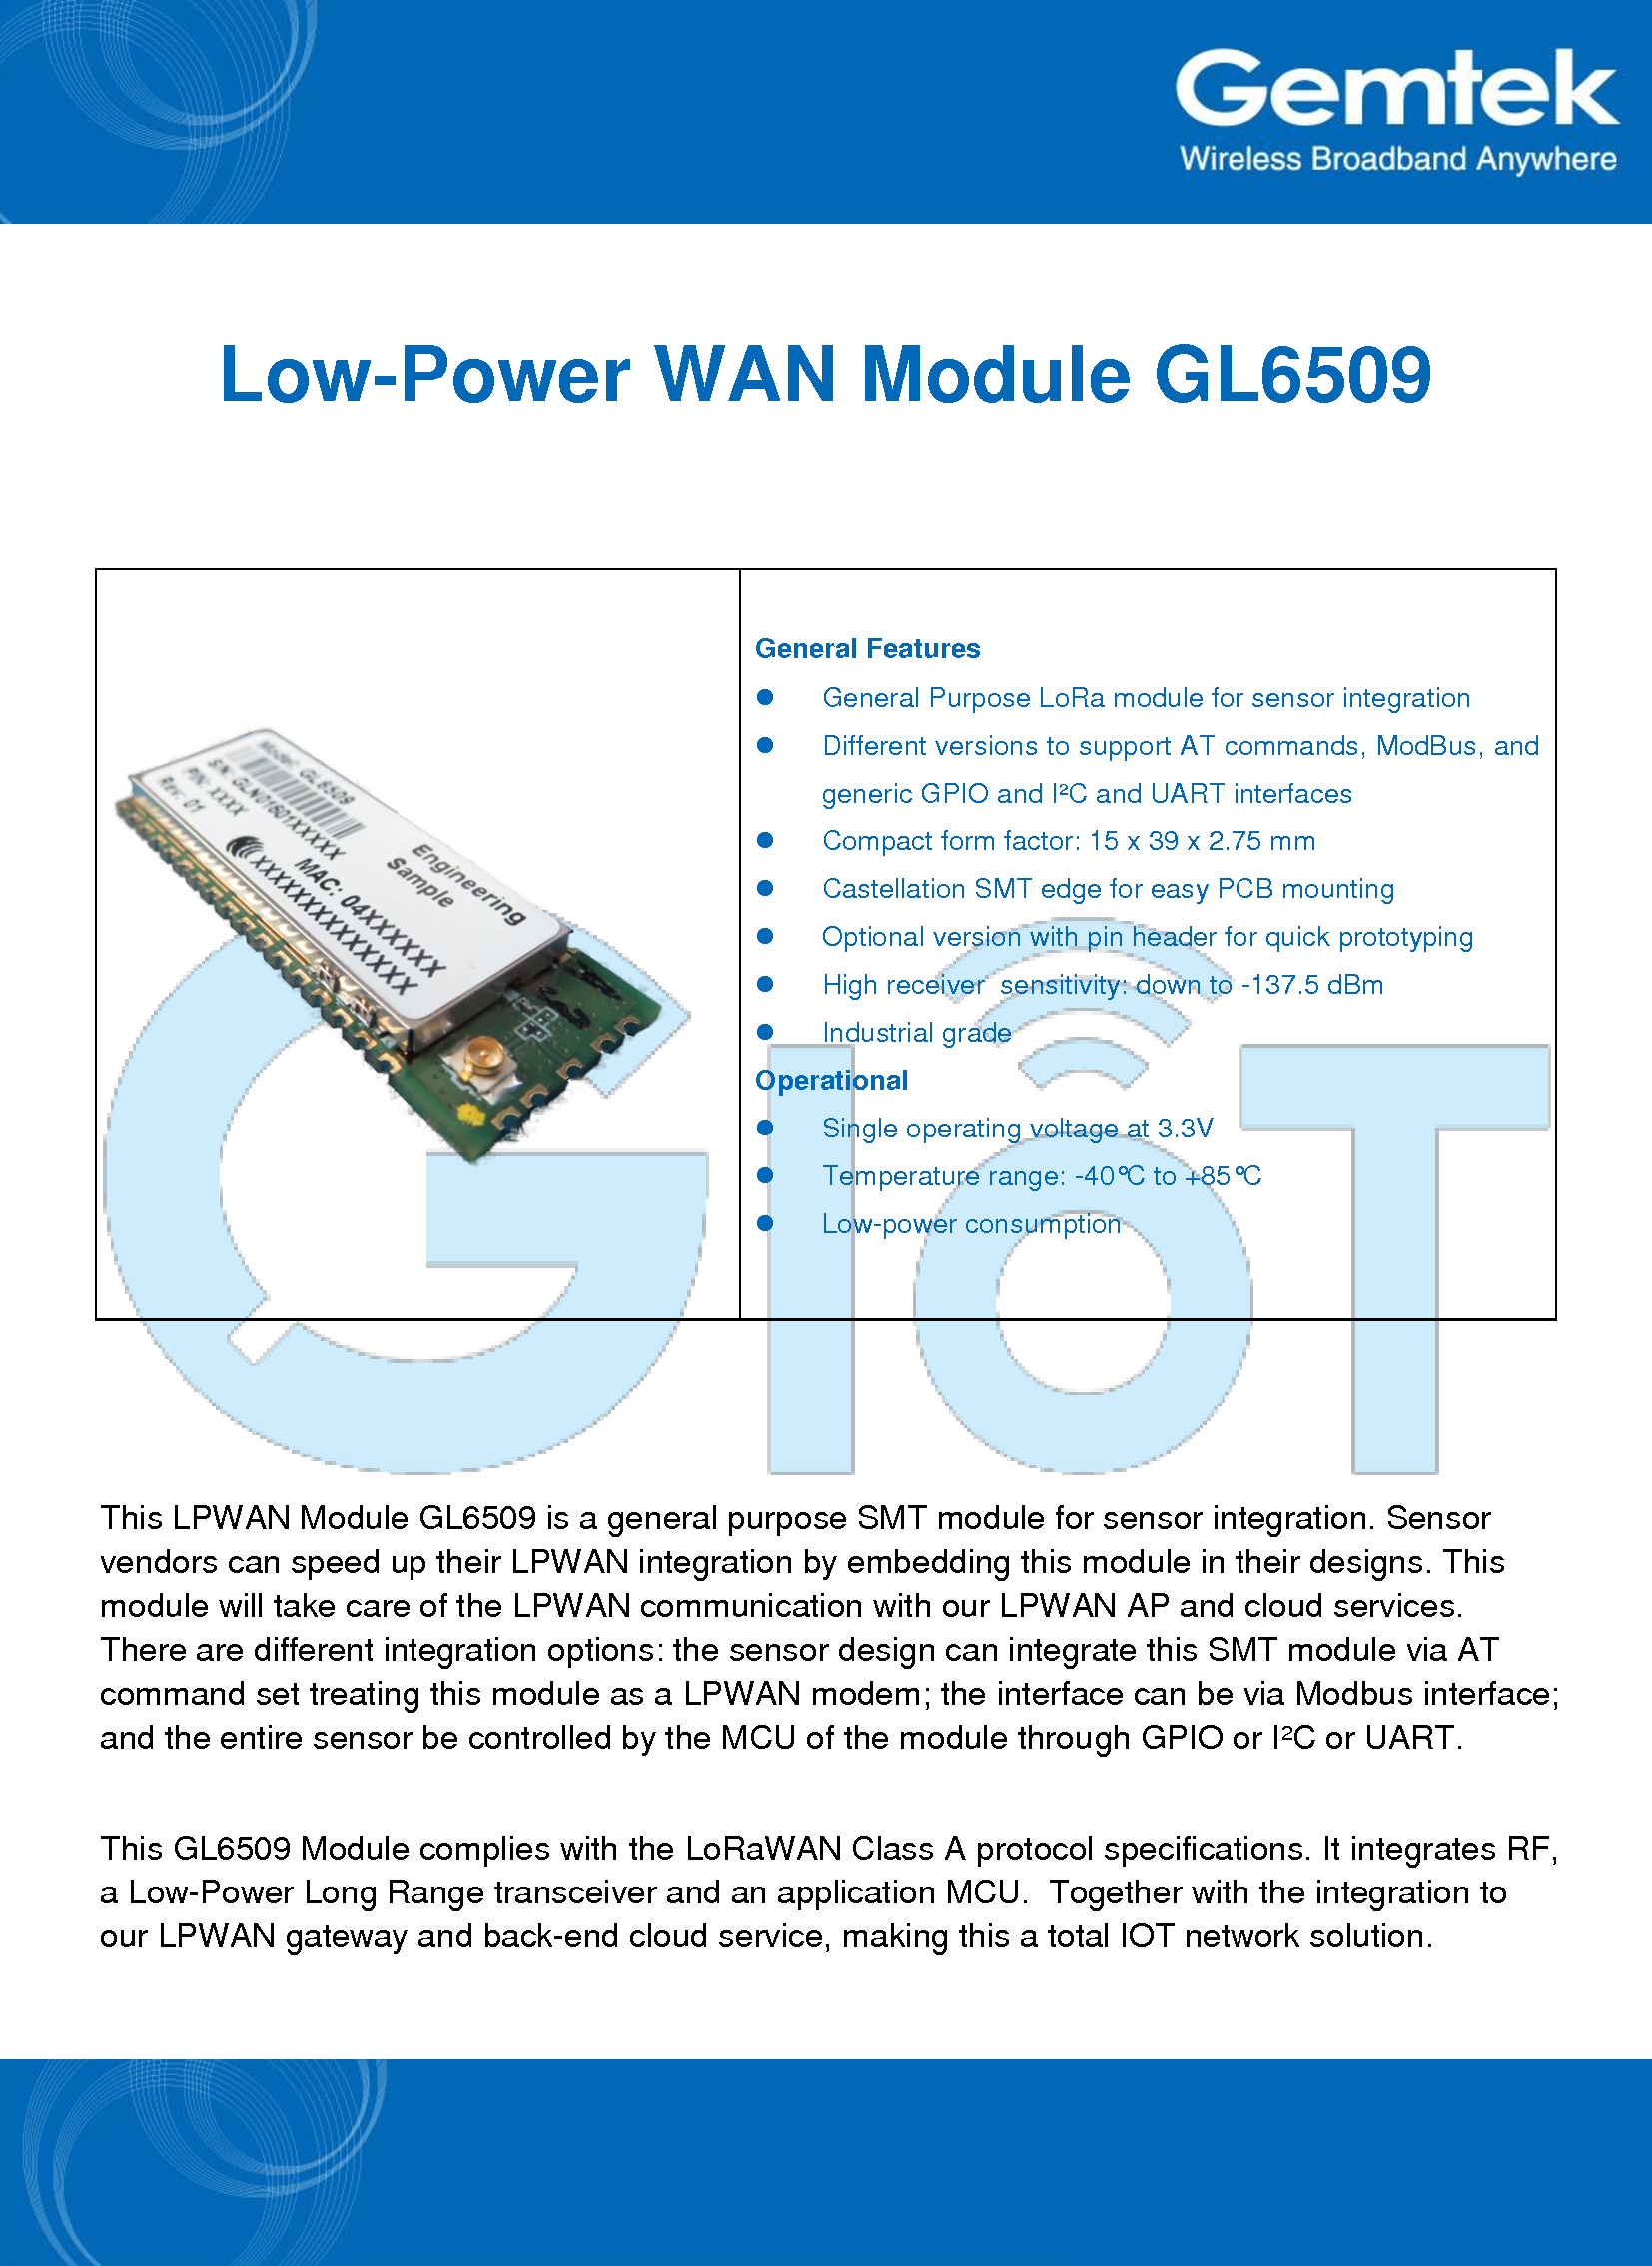    Low-Power WAN Module GL6509   General Features   General Purpose LoRa module for sensor integration   Different versions to support AT commands, ModBus, and generic GPIO and I²C and UART interfaces   Compact form factor: 15 x 39 x 2.75 mm   Castellation SMT edge for easy PCB mounting   Optional version with pin header for quick prototyping   High receiver  sensitivity: down to -137.5 dBm   Industrial grade Operational   Single operating voltage at 3.3V   Temperature range: -40°C to +85°C   Low-power consumption  This LPWAN Module GL6509 is a general purpose SMT module for sensor integration. Sensor vendors can speed up their LPWAN integration by embedding this module in their designs. This module will take care of the LPWAN communication with our LPWAN AP and cloud services. There are different integration options: the sensor design can integrate this SMT module via AT command set treating this module as a LPWAN modem; the interface can be via Modbus interface; and the entire sensor be controlled by the MCU of the module through GPIO or I²C or UART. This GL6509 Module complies with the LoRaWAN Class A protocol specifications. It integrates RF, a Low-Power Long Range transceiver and an application MCU.  Together with the integration to our LPWAN gateway and back-end cloud service, making this a total IOT network solution. 